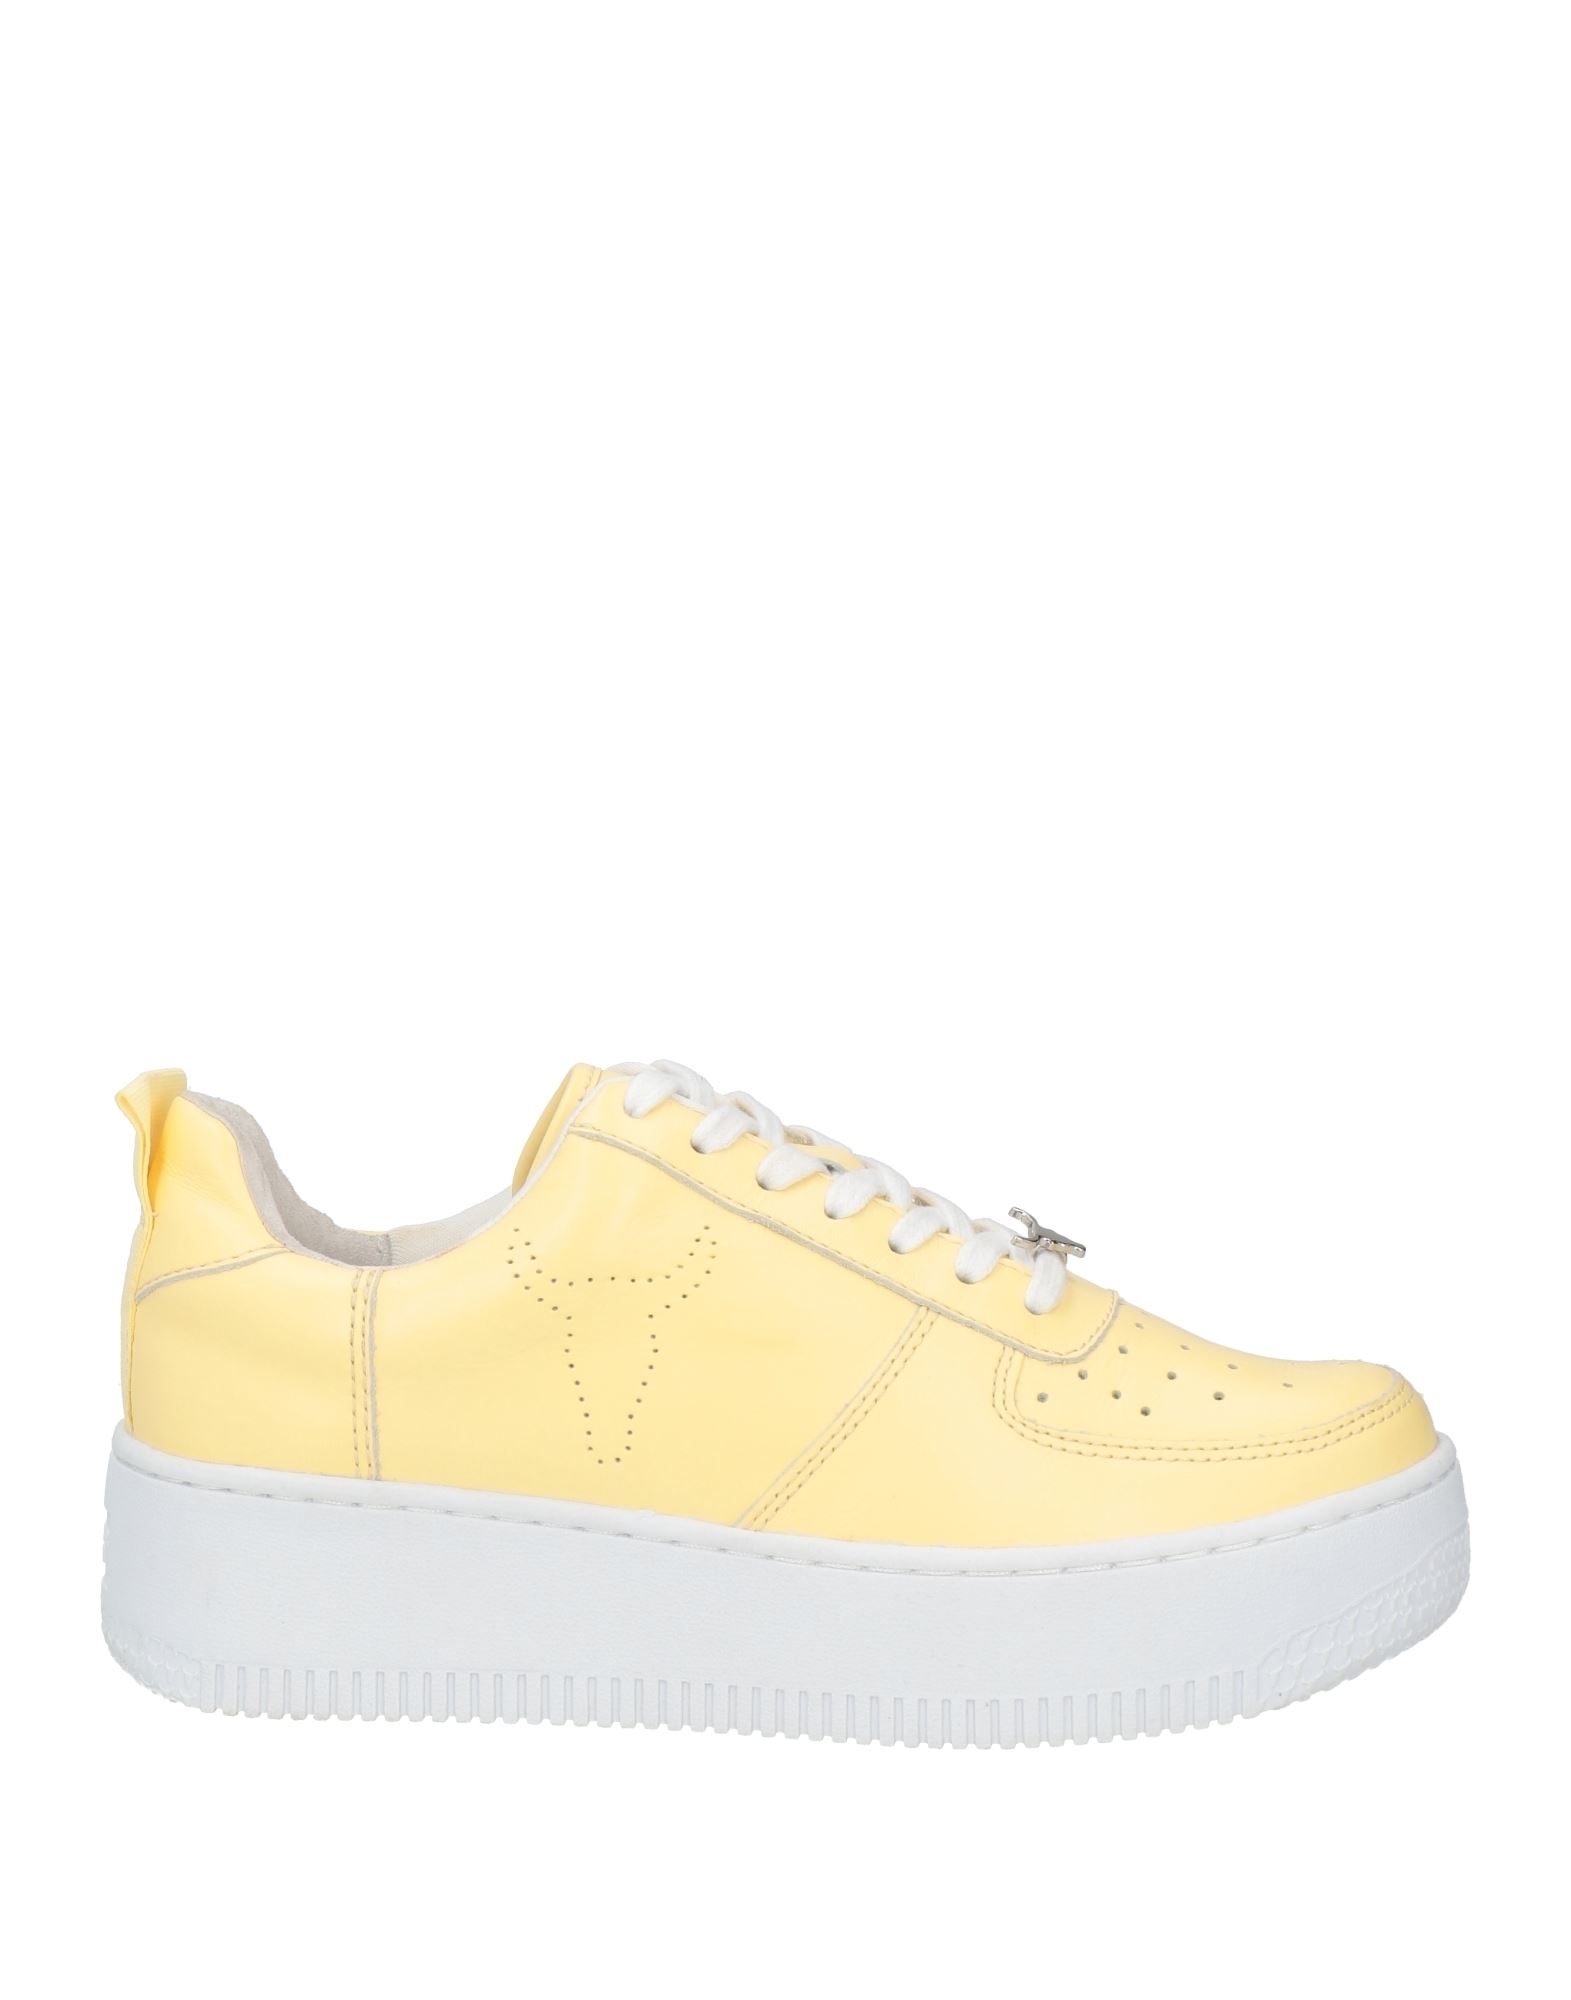 WINDSOR SMITH WINDSOR SMITH WOMAN SNEAKERS YELLOW SIZE 9 LEATHER,11264531BJ 3